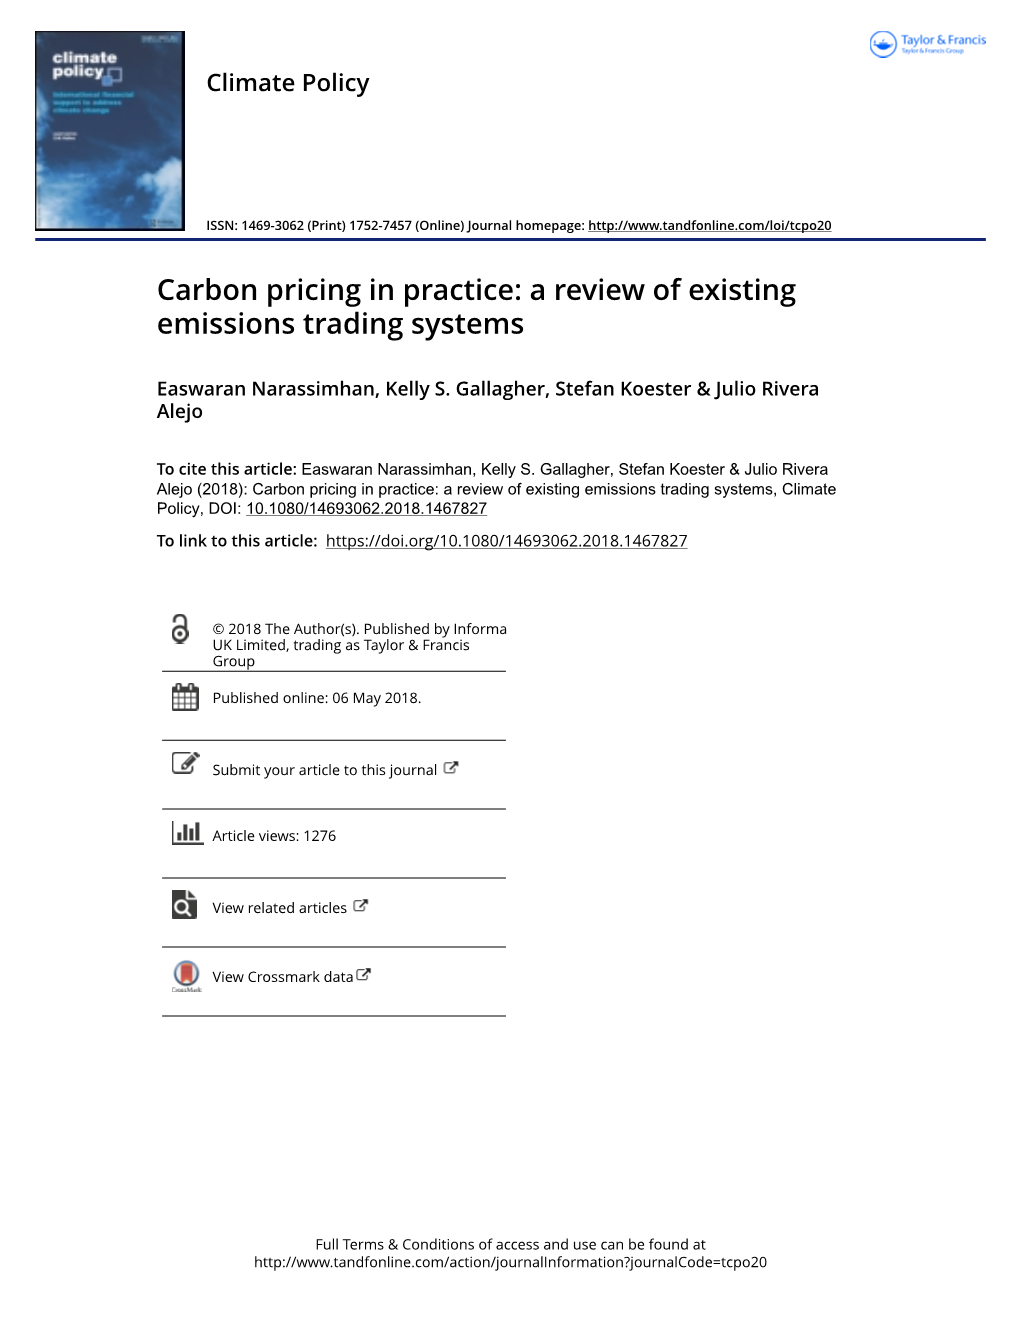 Carbon Pricing in Practice: a Review of Existing Emissions Trading Systems